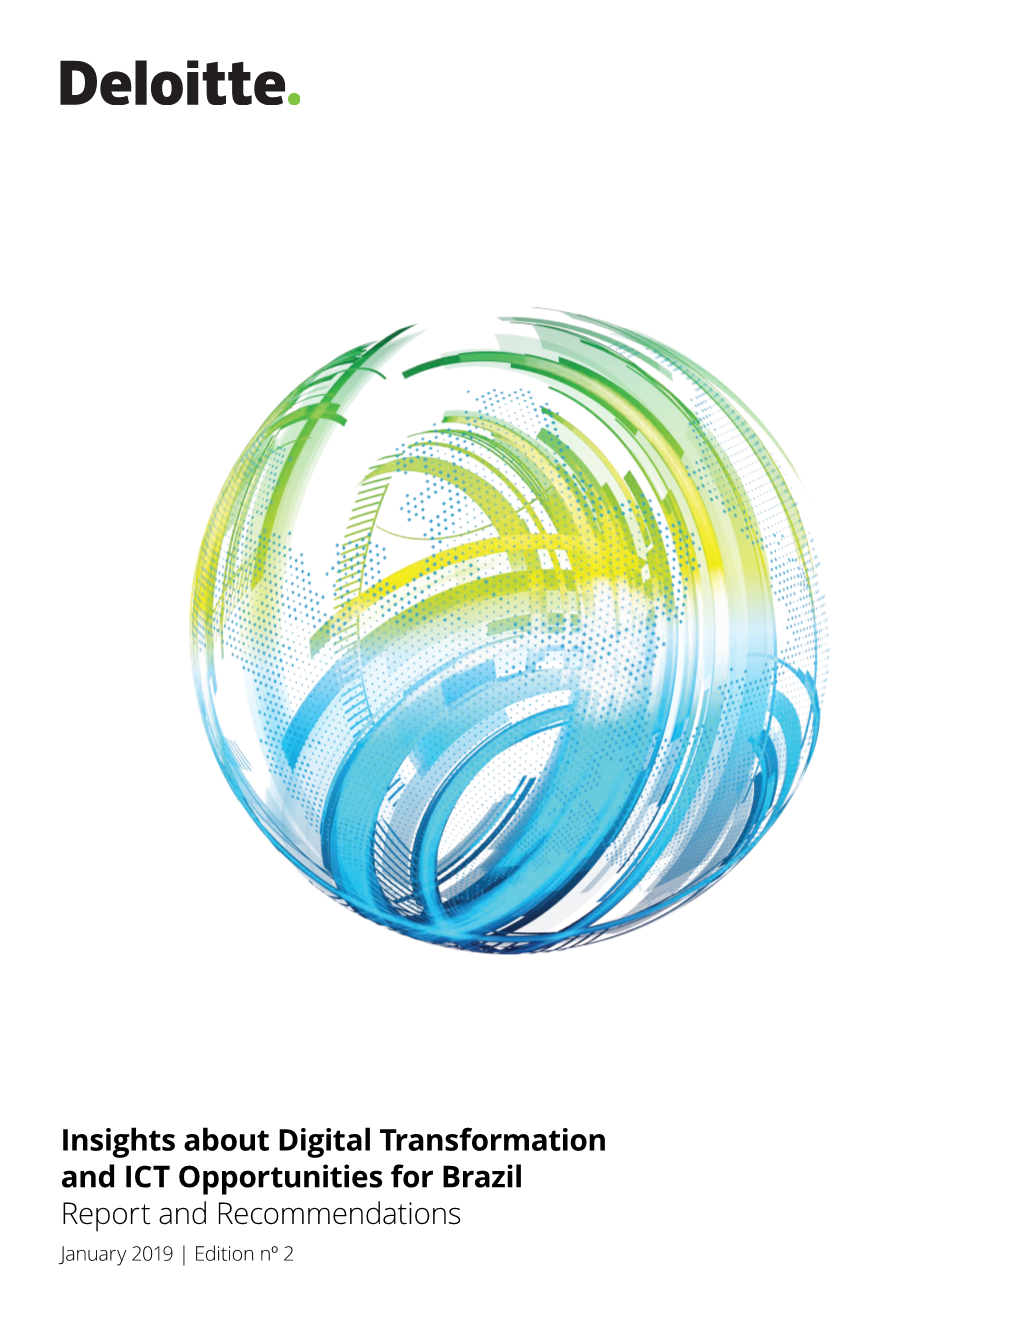 Insights About Digital Transformation and ICT Opportunities for Brazil Report and Recommendations January 2019 | Edition Nº 2